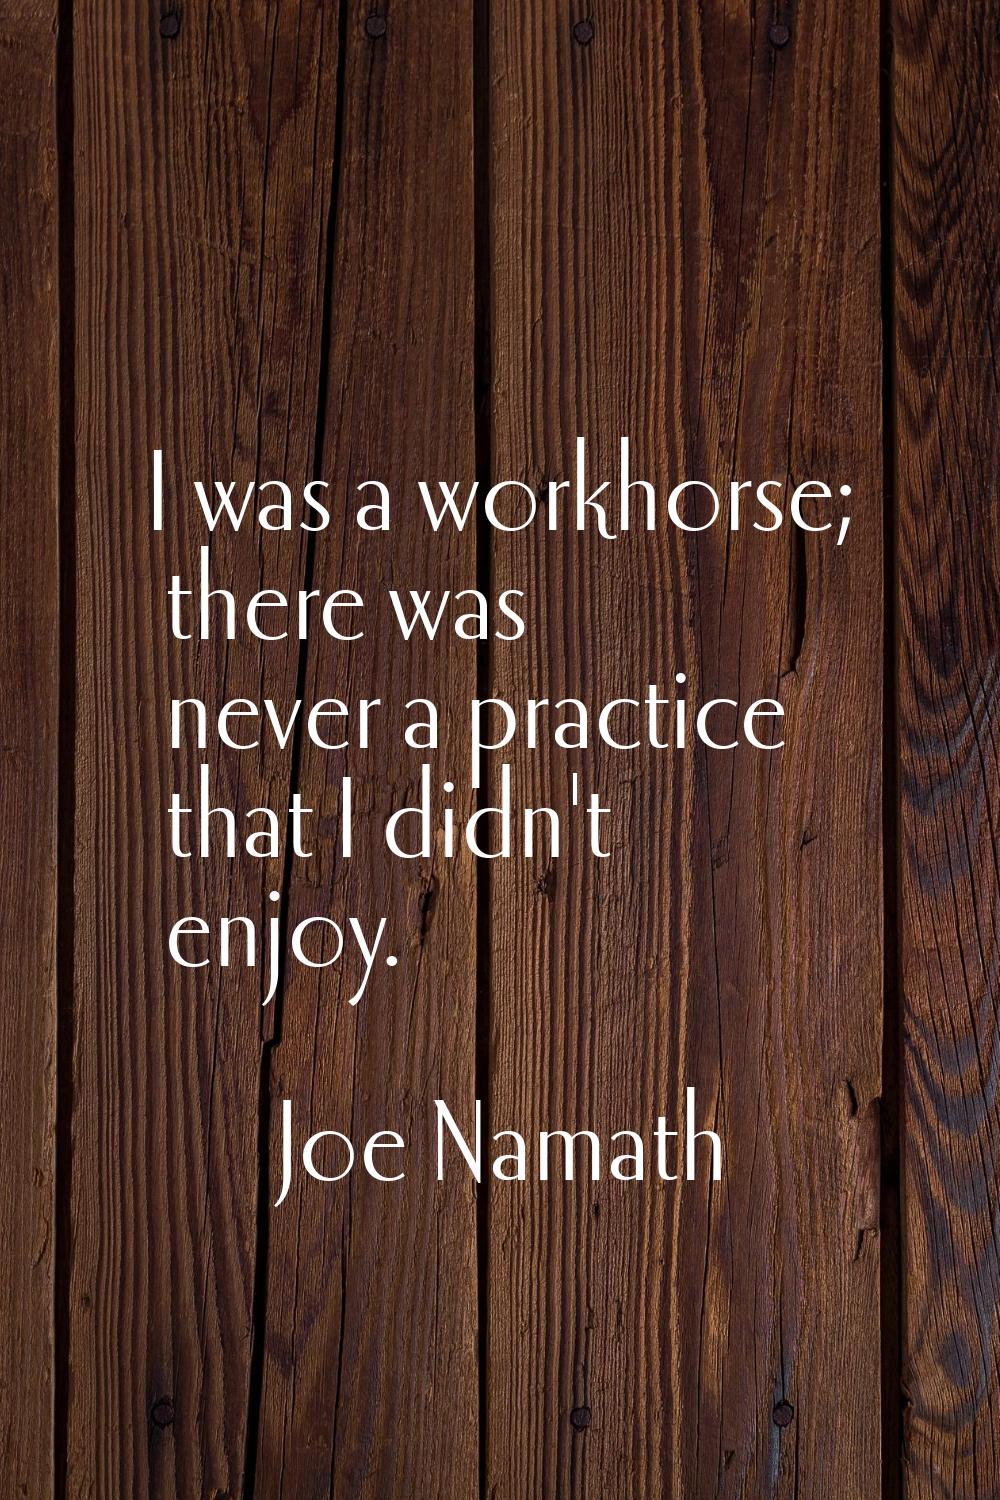 I was a workhorse; there was never a practice that I didn't enjoy.